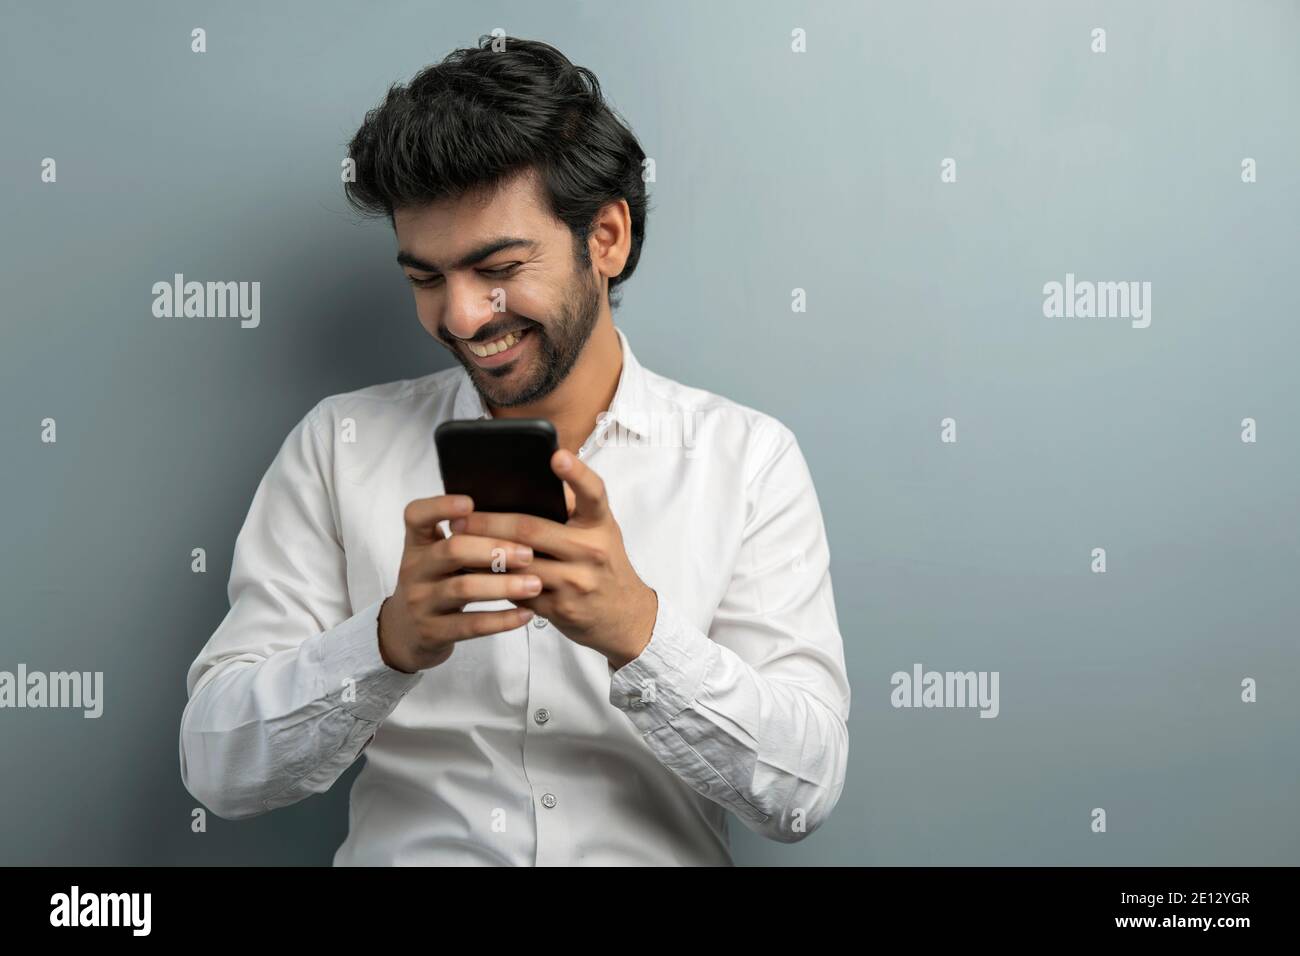 A YOUNG EXECUTIVE LAUGHING WHILE USING MOBILE PHONE DURING VIDEO CONFERENCING Stock Photo